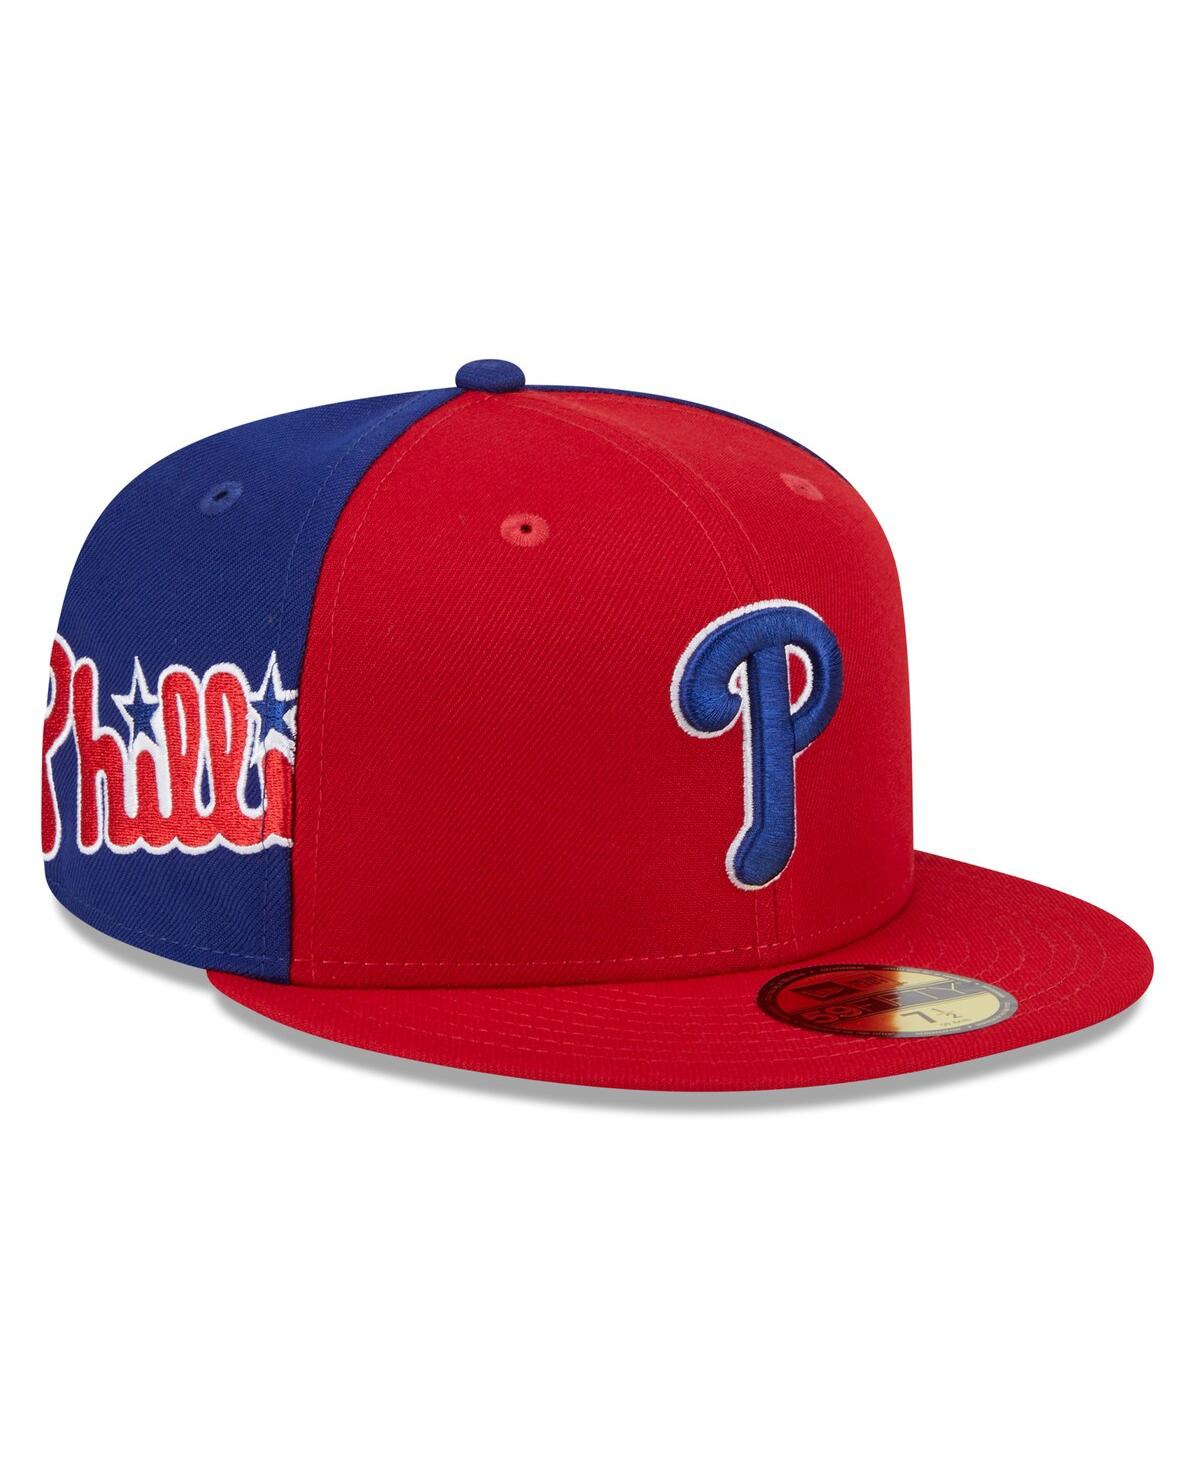 Men's Red/Royal Philadelphia Phillies Gameday Sideswipe 59fifty Fitted Hat - Red Royal